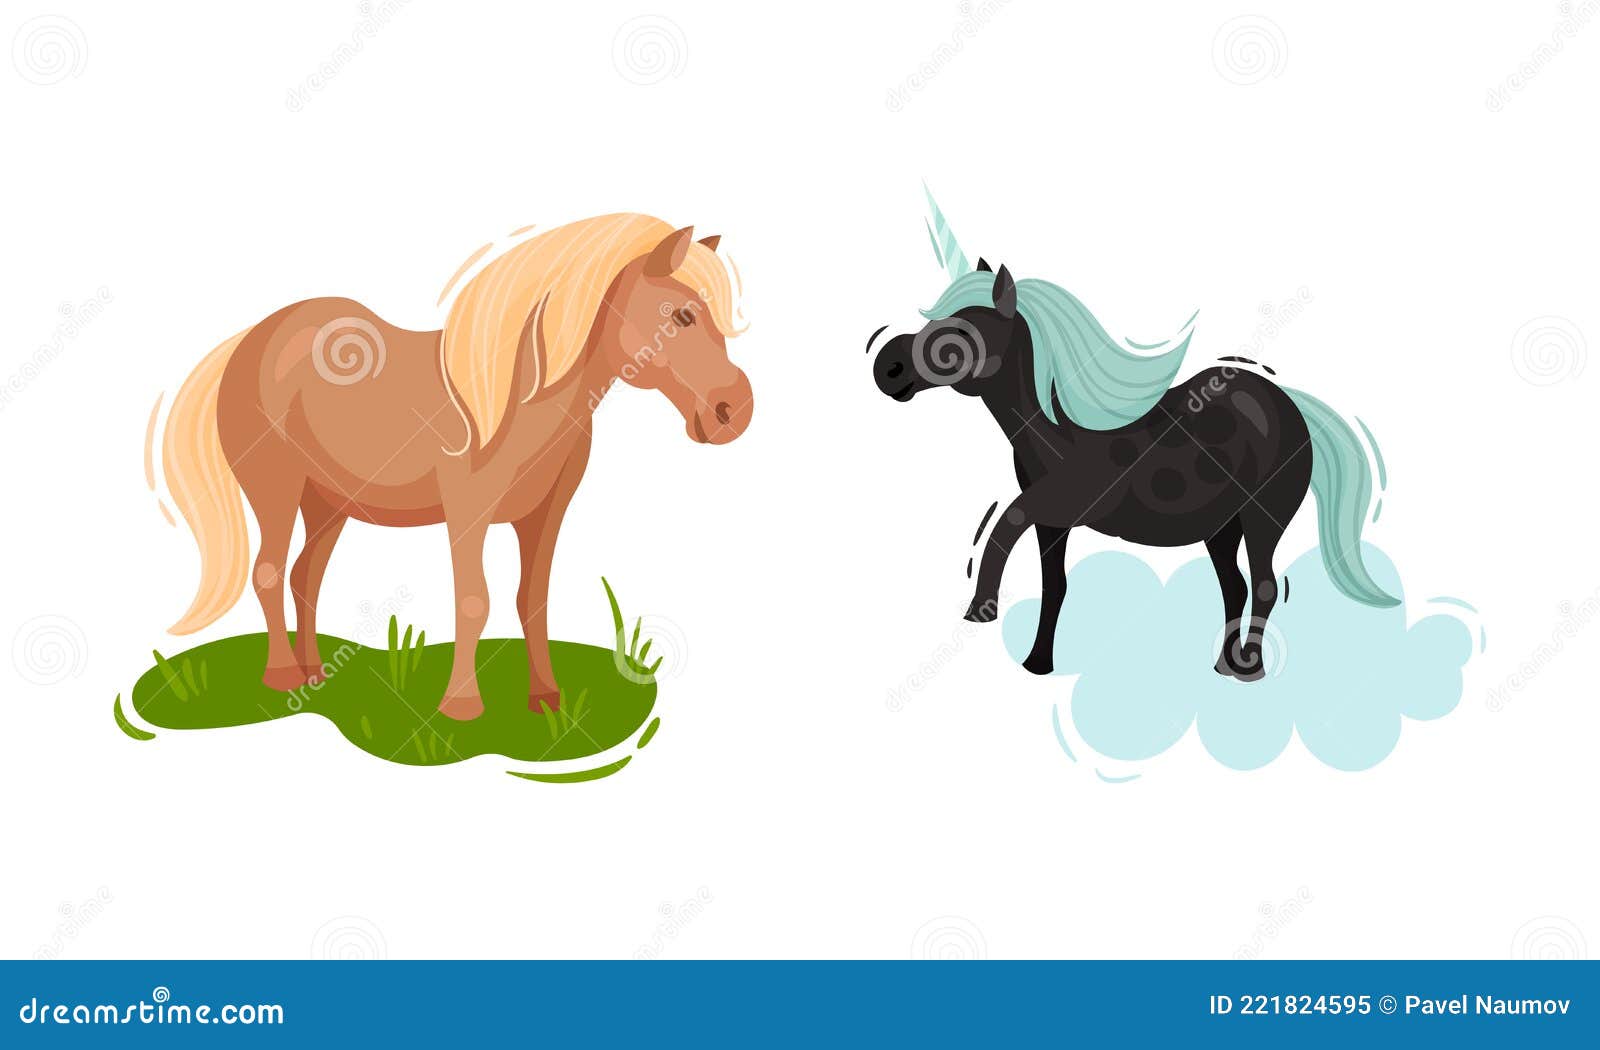 Iceland Symbols with Horse Grazing and Unicorn Vector Set Stock Vector ...